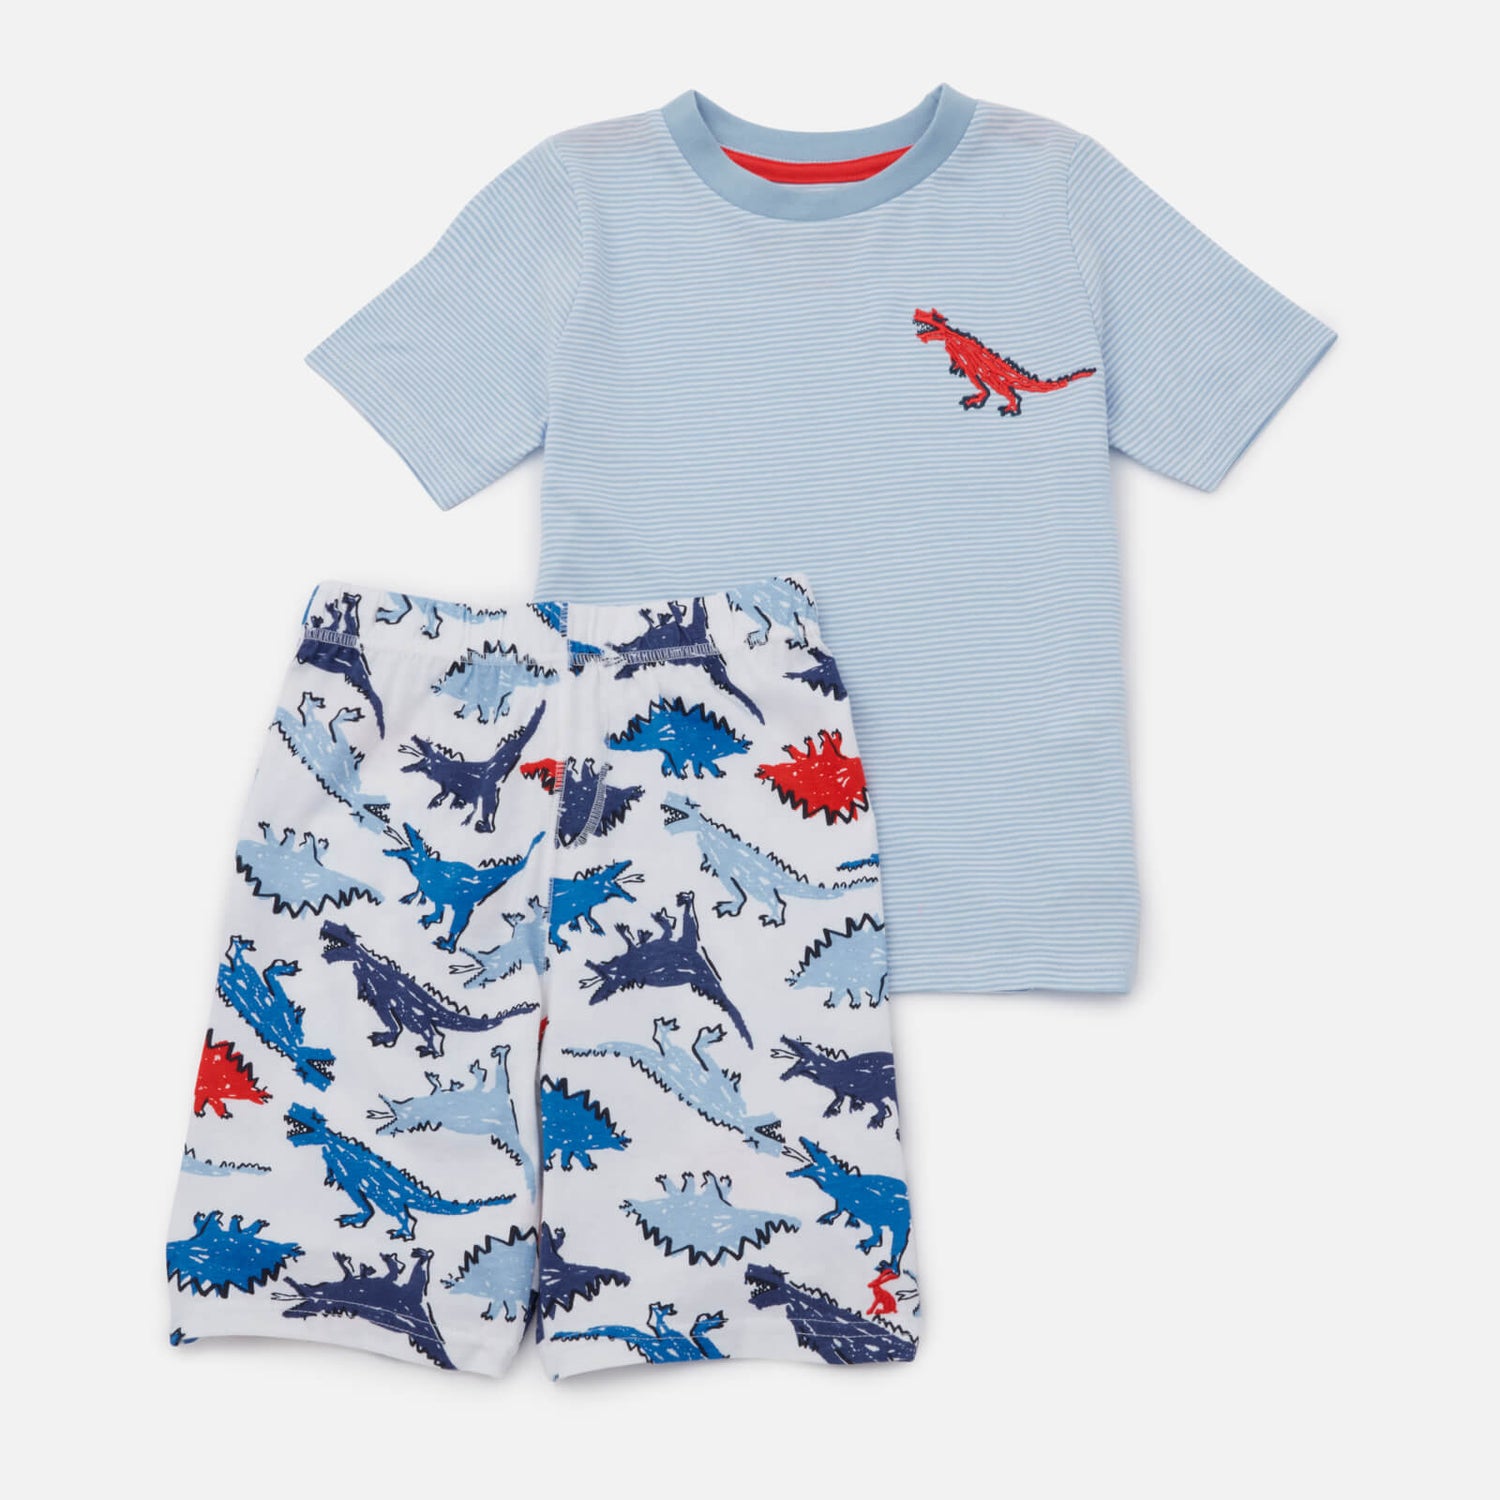 Joules Kids' Shorts Sleeve Pj Set - Scribbly Dino - 3 Years